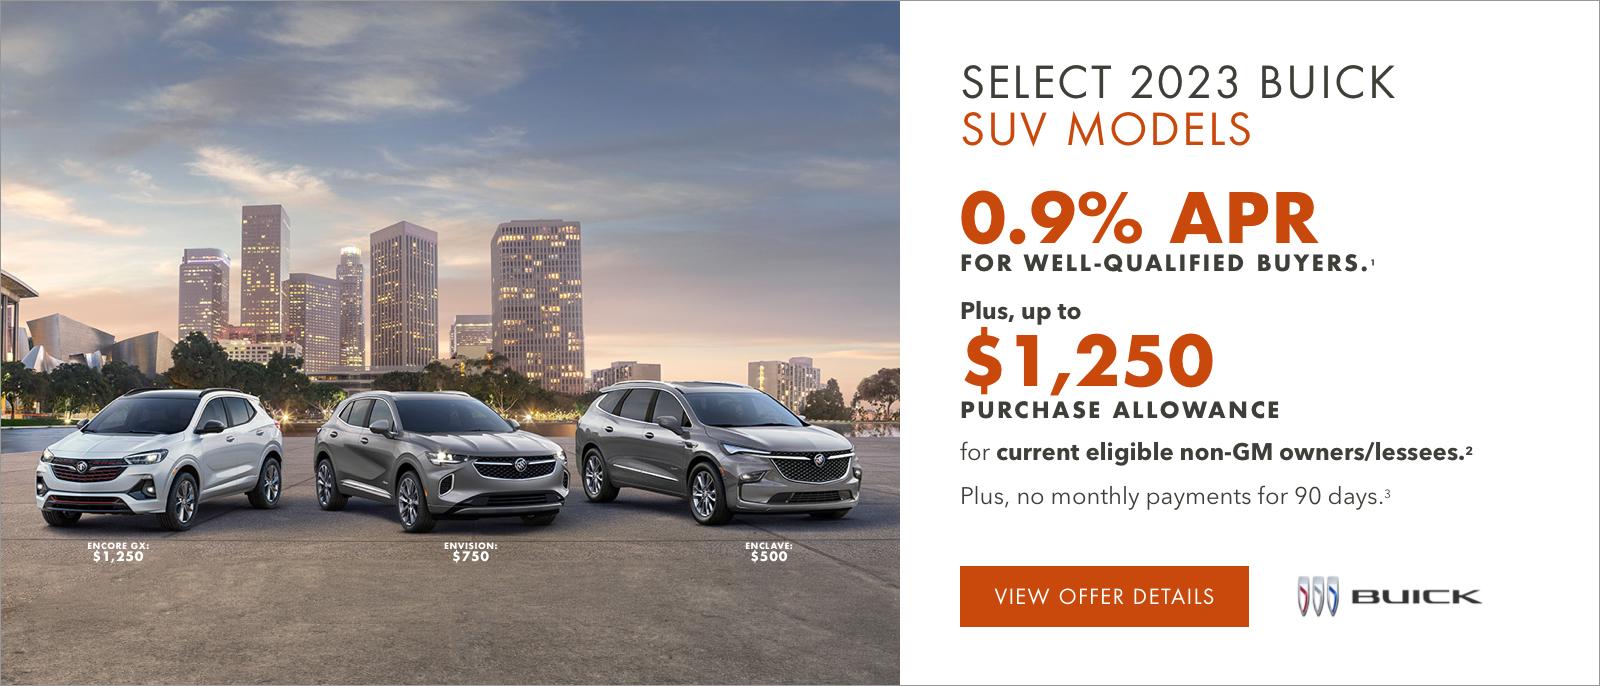 0.9% APR 
FOR WELL-QUALIFIED BUYERS.1

Plus, up to $1,250 PURCHASE ALLOWANCE for current eligible non-GM owners/lessees.2

Plus, no monthly payments for 90 days.3